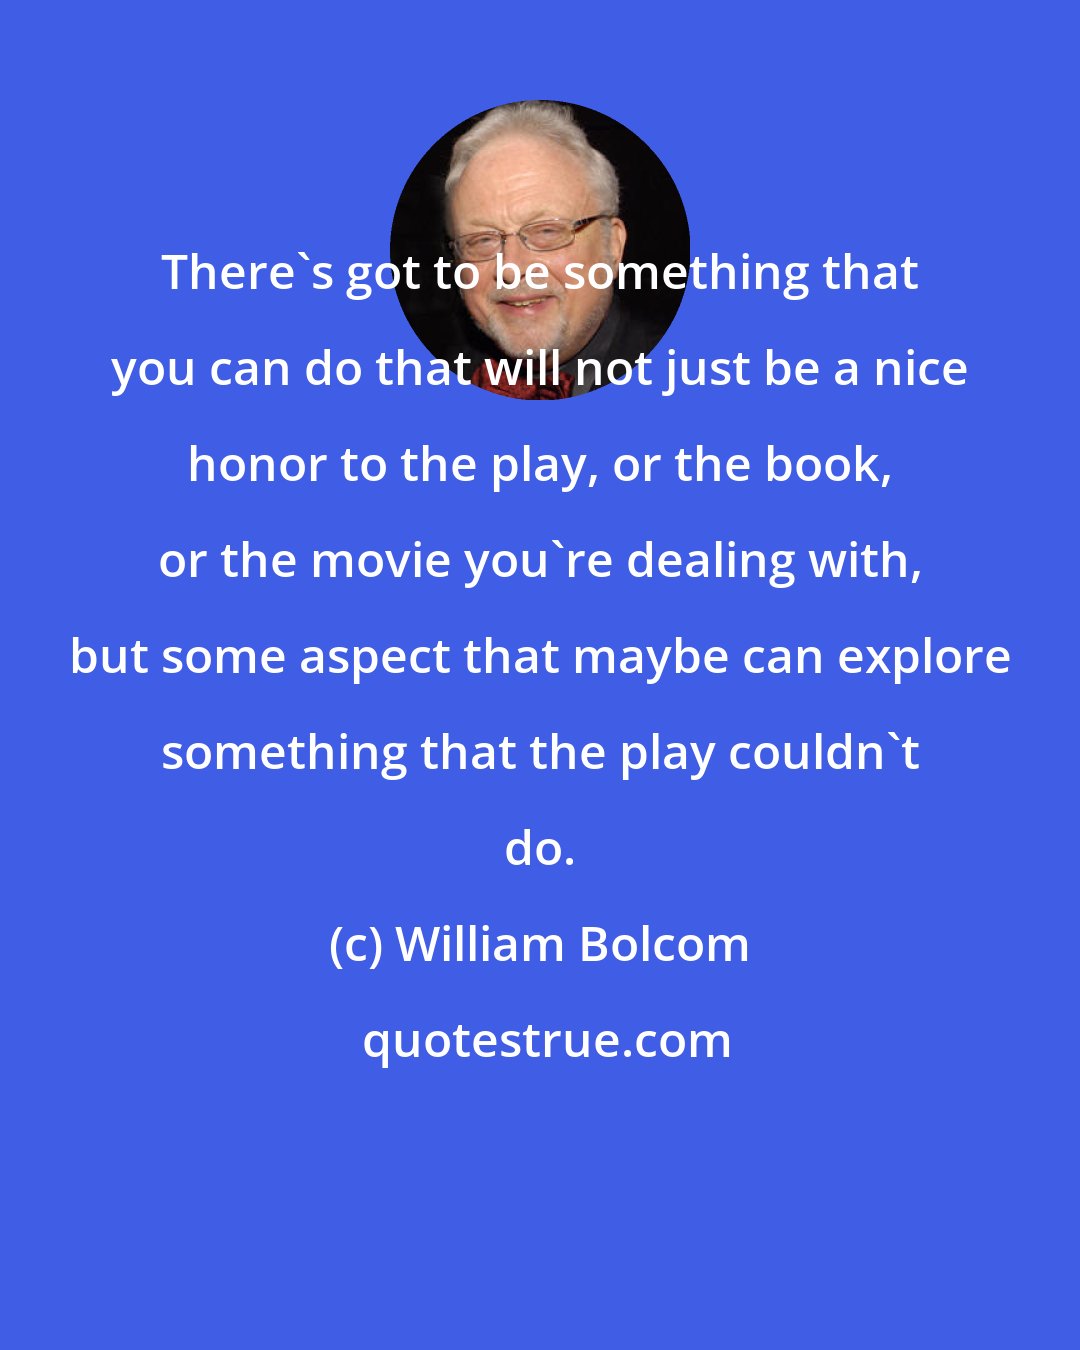 William Bolcom: There's got to be something that you can do that will not just be a nice honor to the play, or the book, or the movie you're dealing with, but some aspect that maybe can explore something that the play couldn't do.